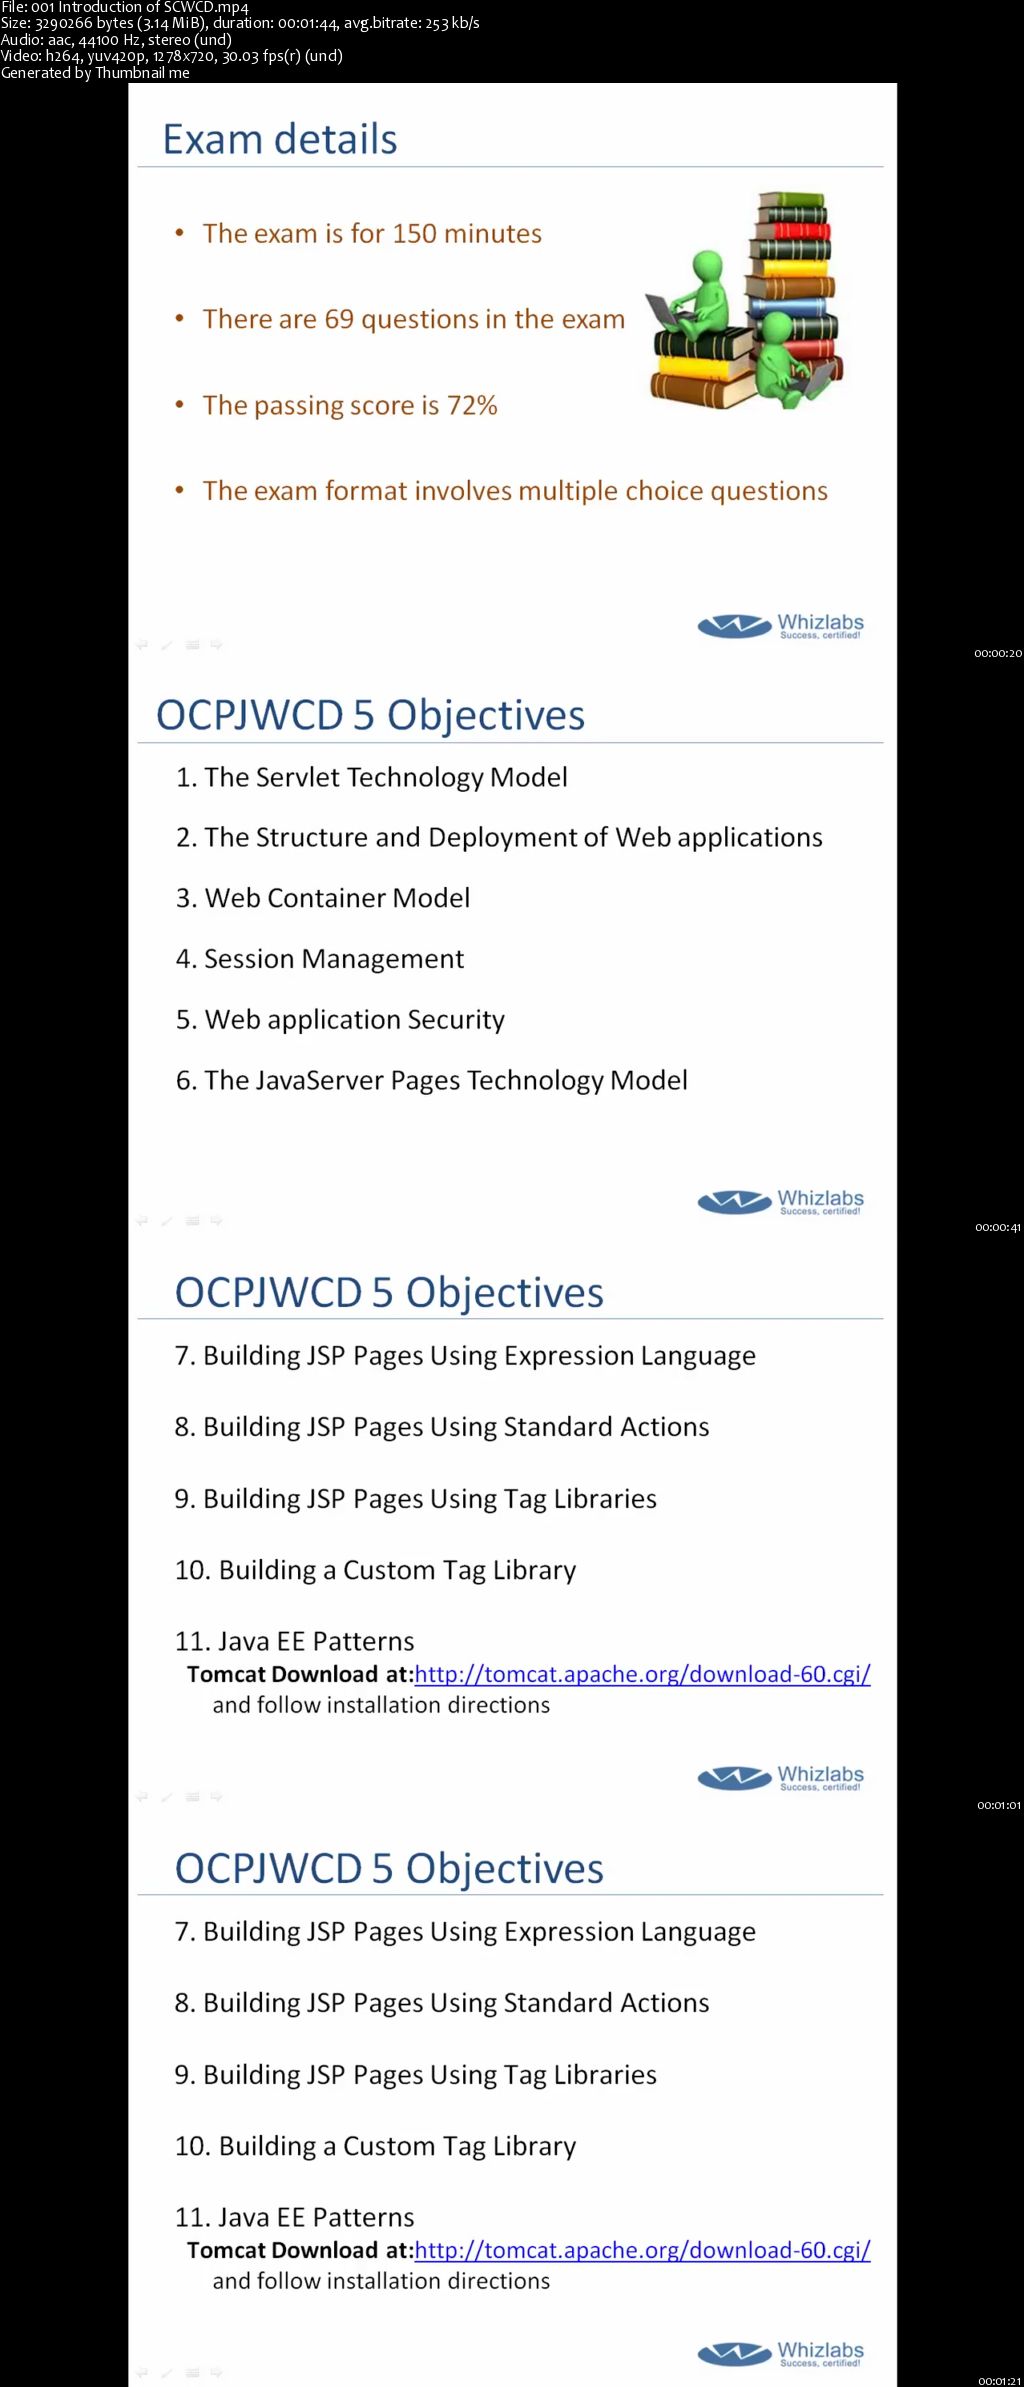 Oracle Java SCWCD / OCWCD 5 Certification Exam Preparation